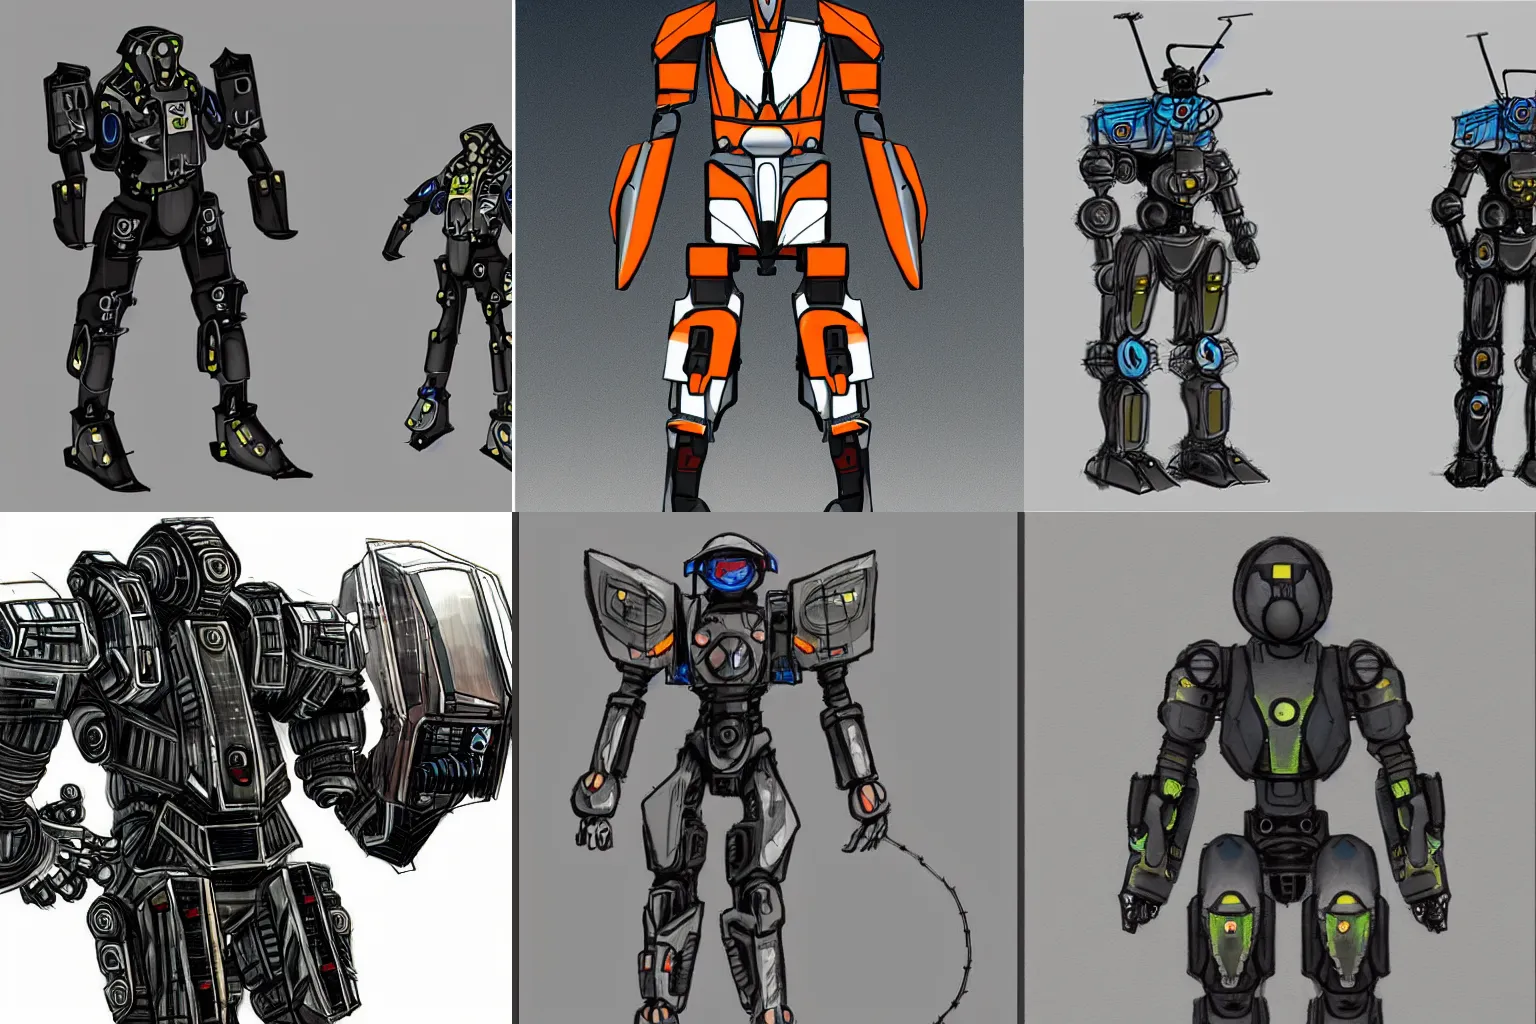 Prompt: Concept art for a mech suit designed for mining, industrial